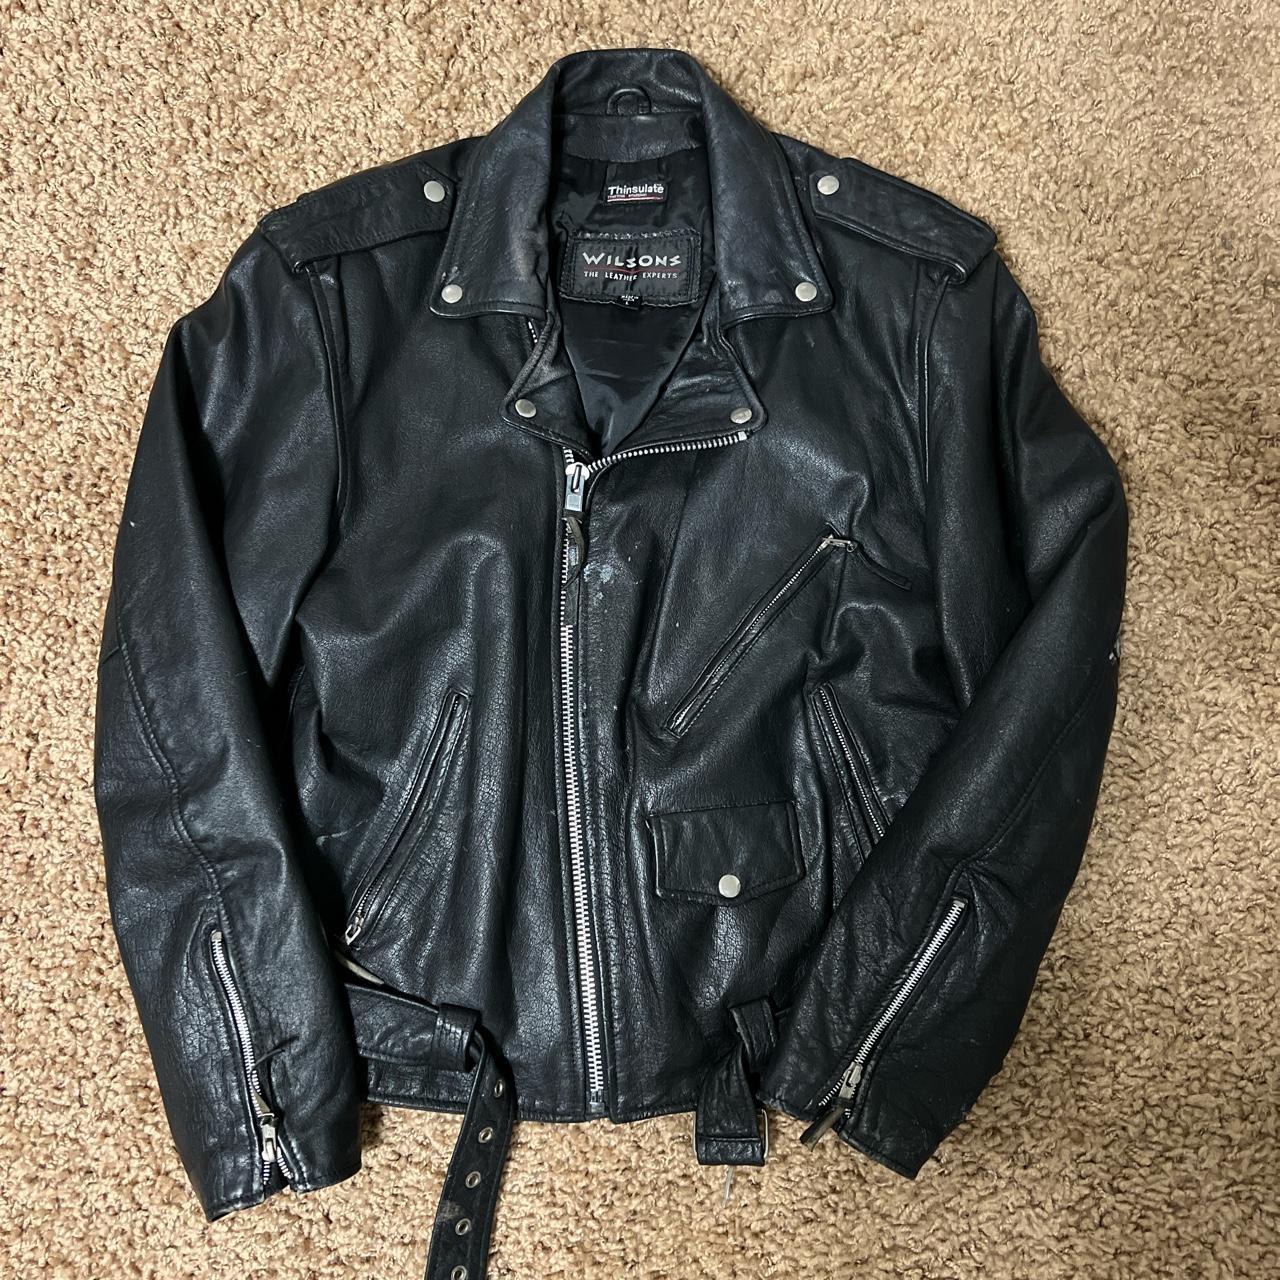 Wilsons leather jacket!! Worn in perfectly and fits... - Depop